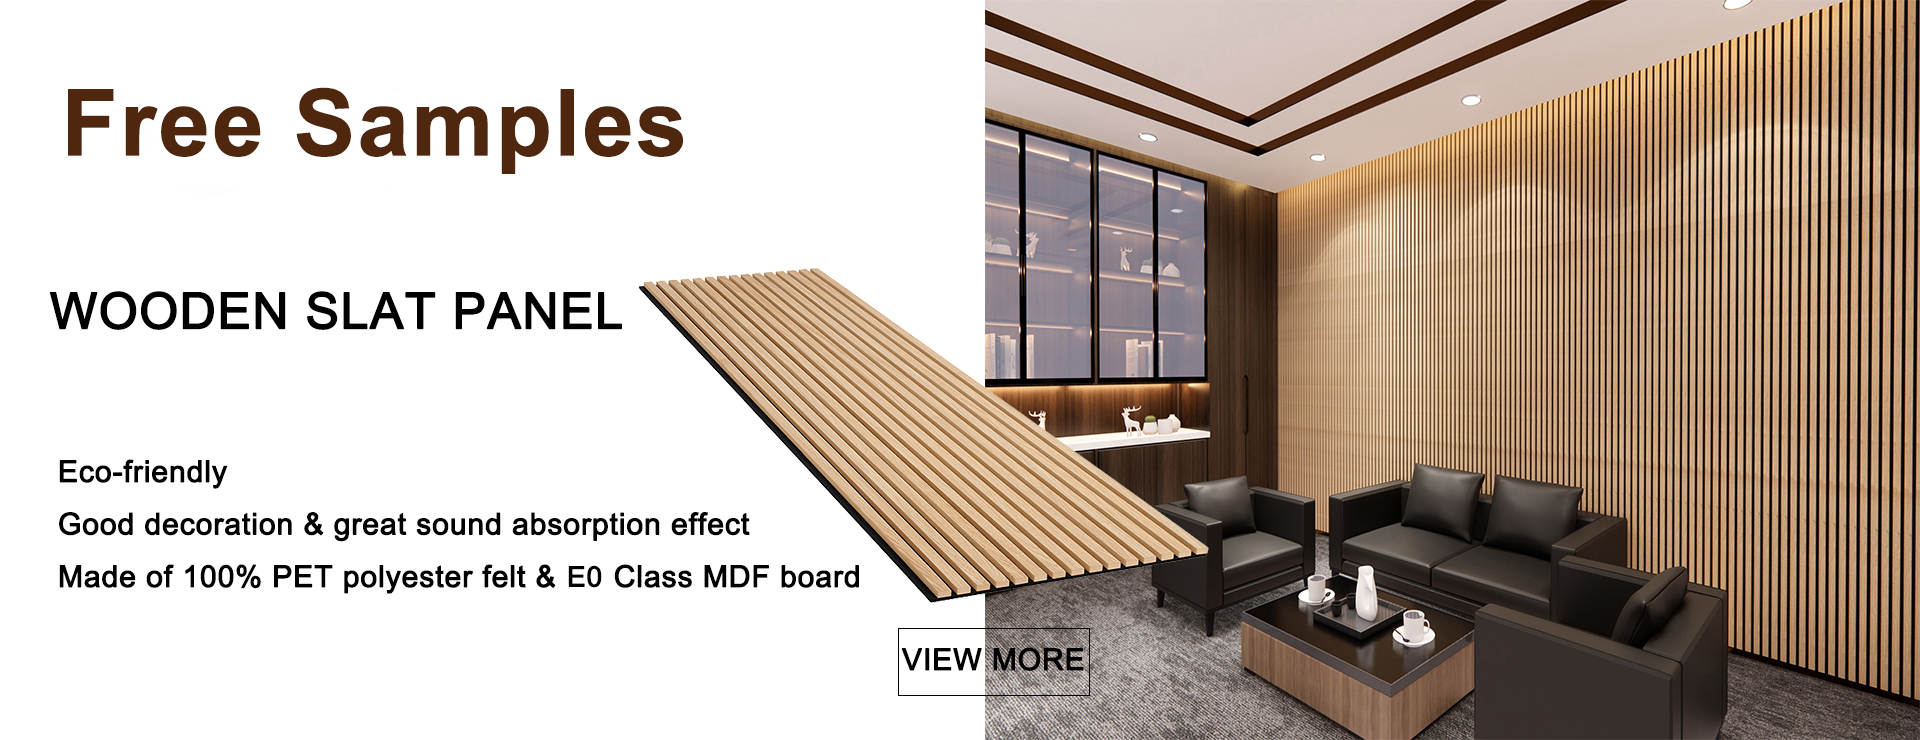 Home Soundproof Booth Studio Sound Proof Diffuser Wooden Slats Wood Wall  Acoustics Panel - China Acoustic Board, Acoustic Foam